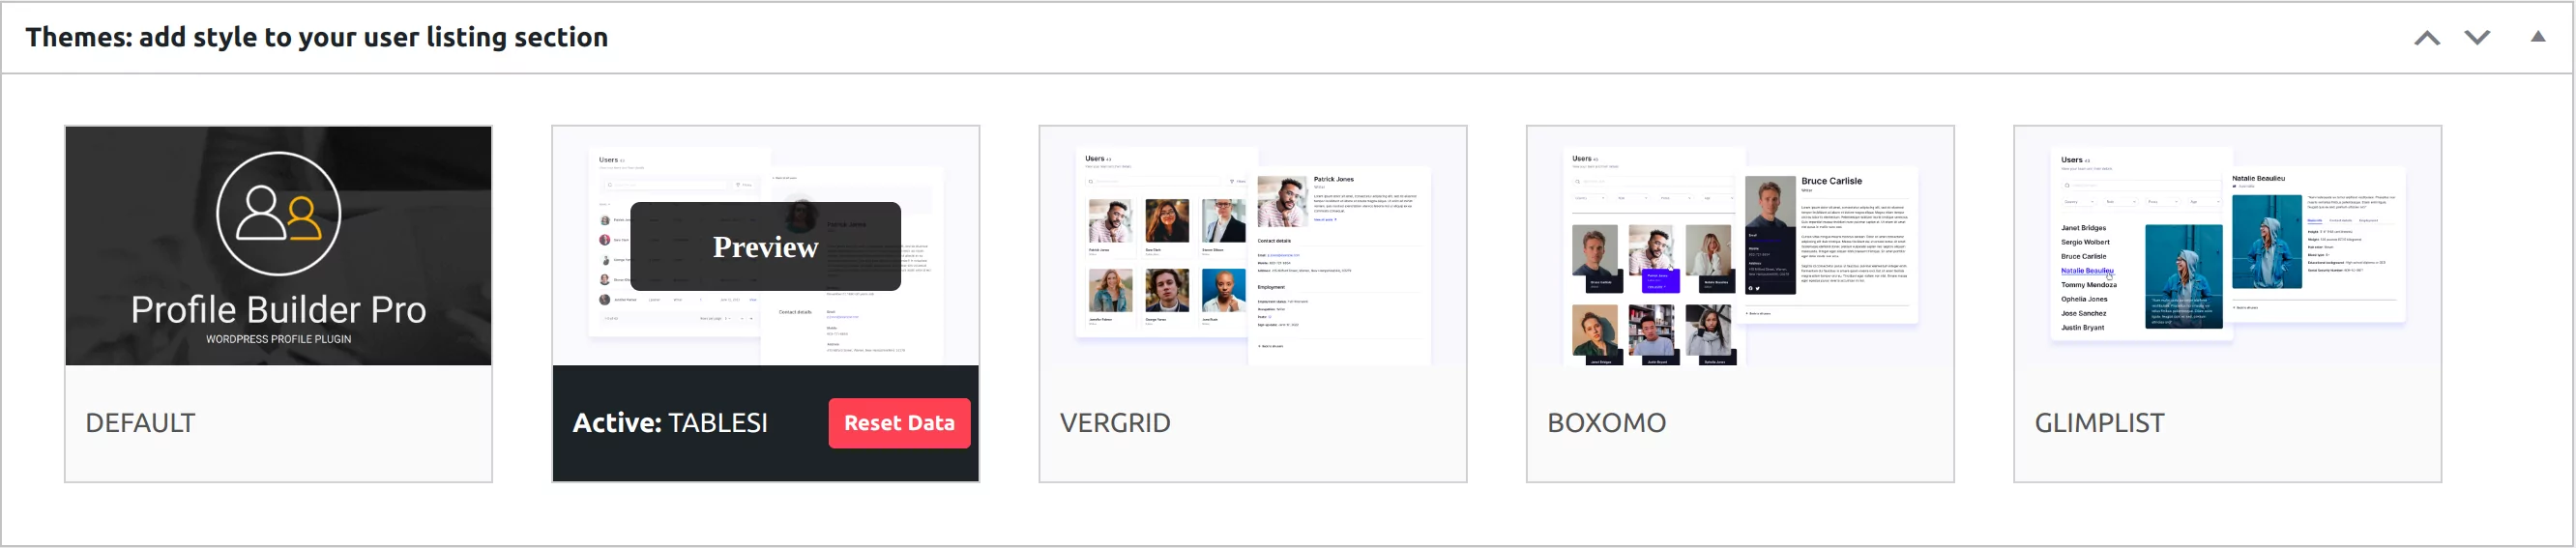 Profile Builder - User Listing - Themes